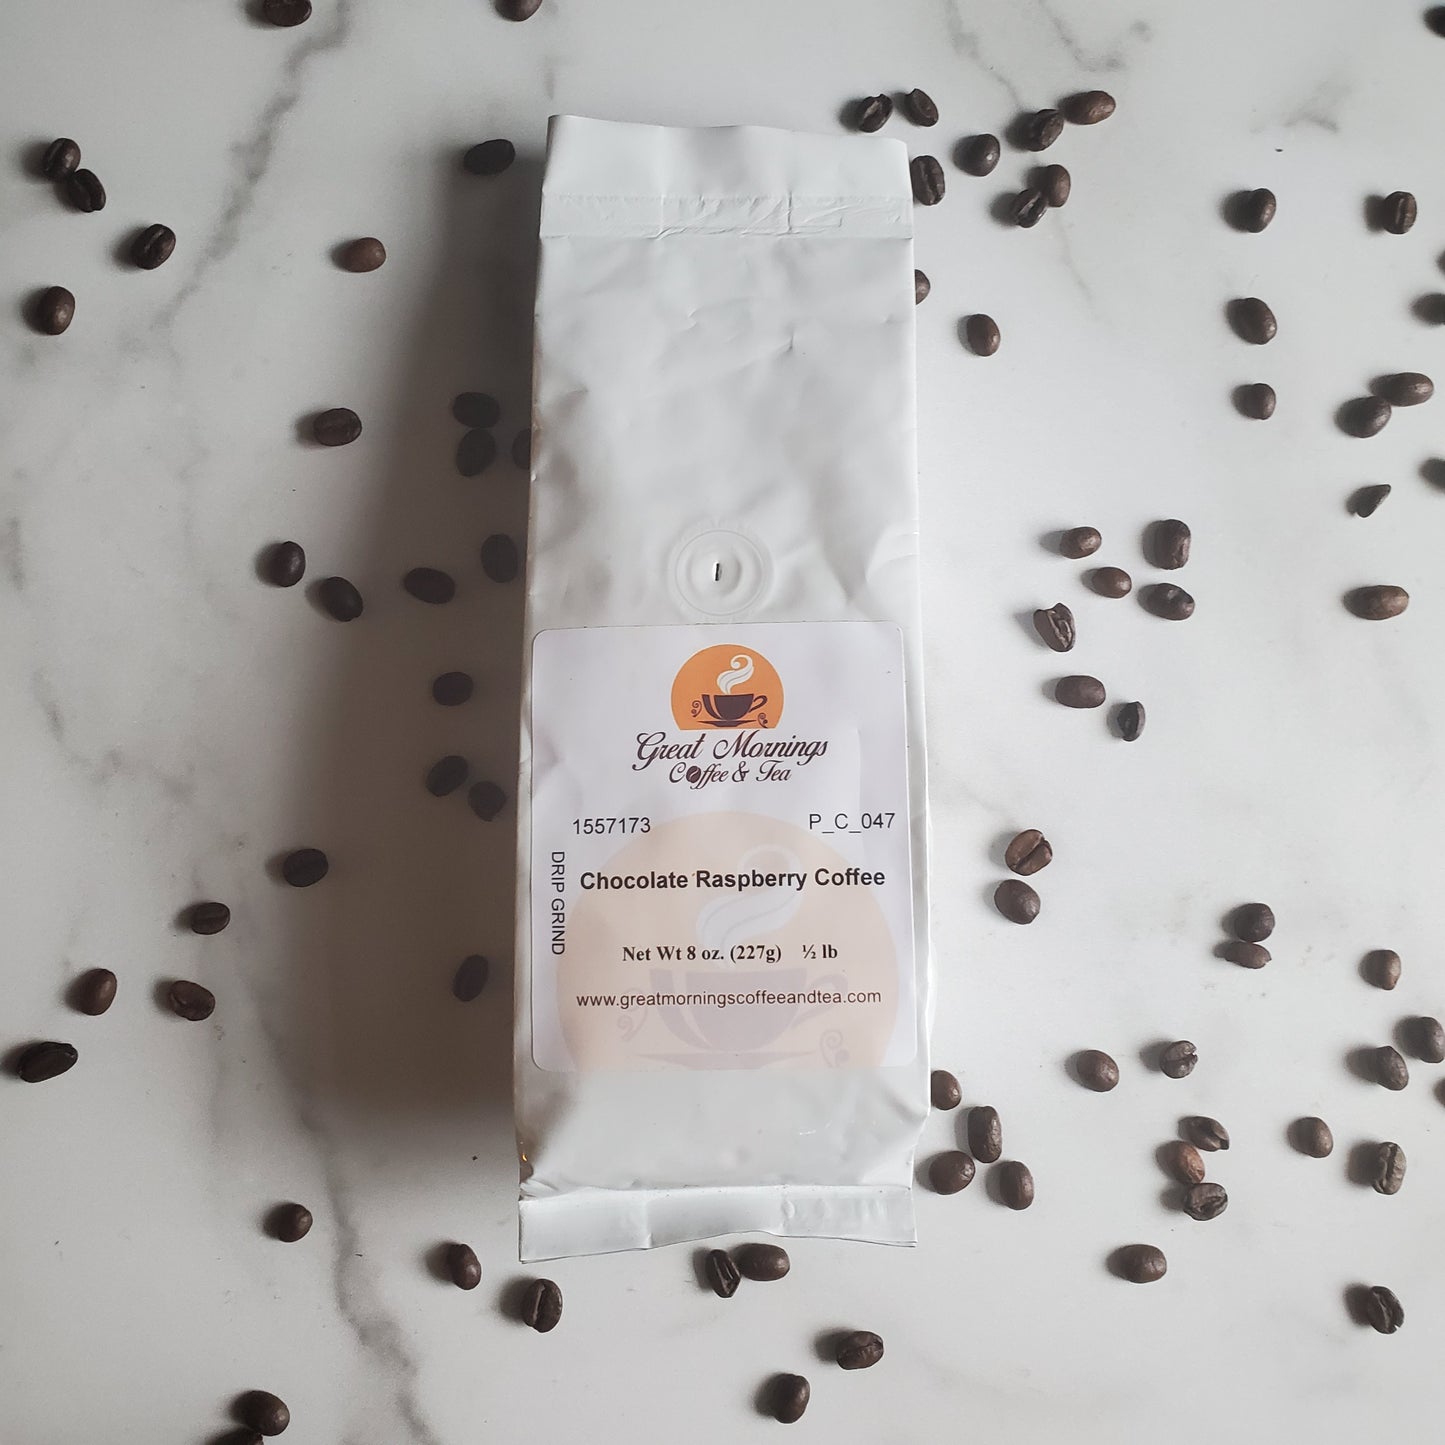 Coffee Bag on marble background with coffee beans